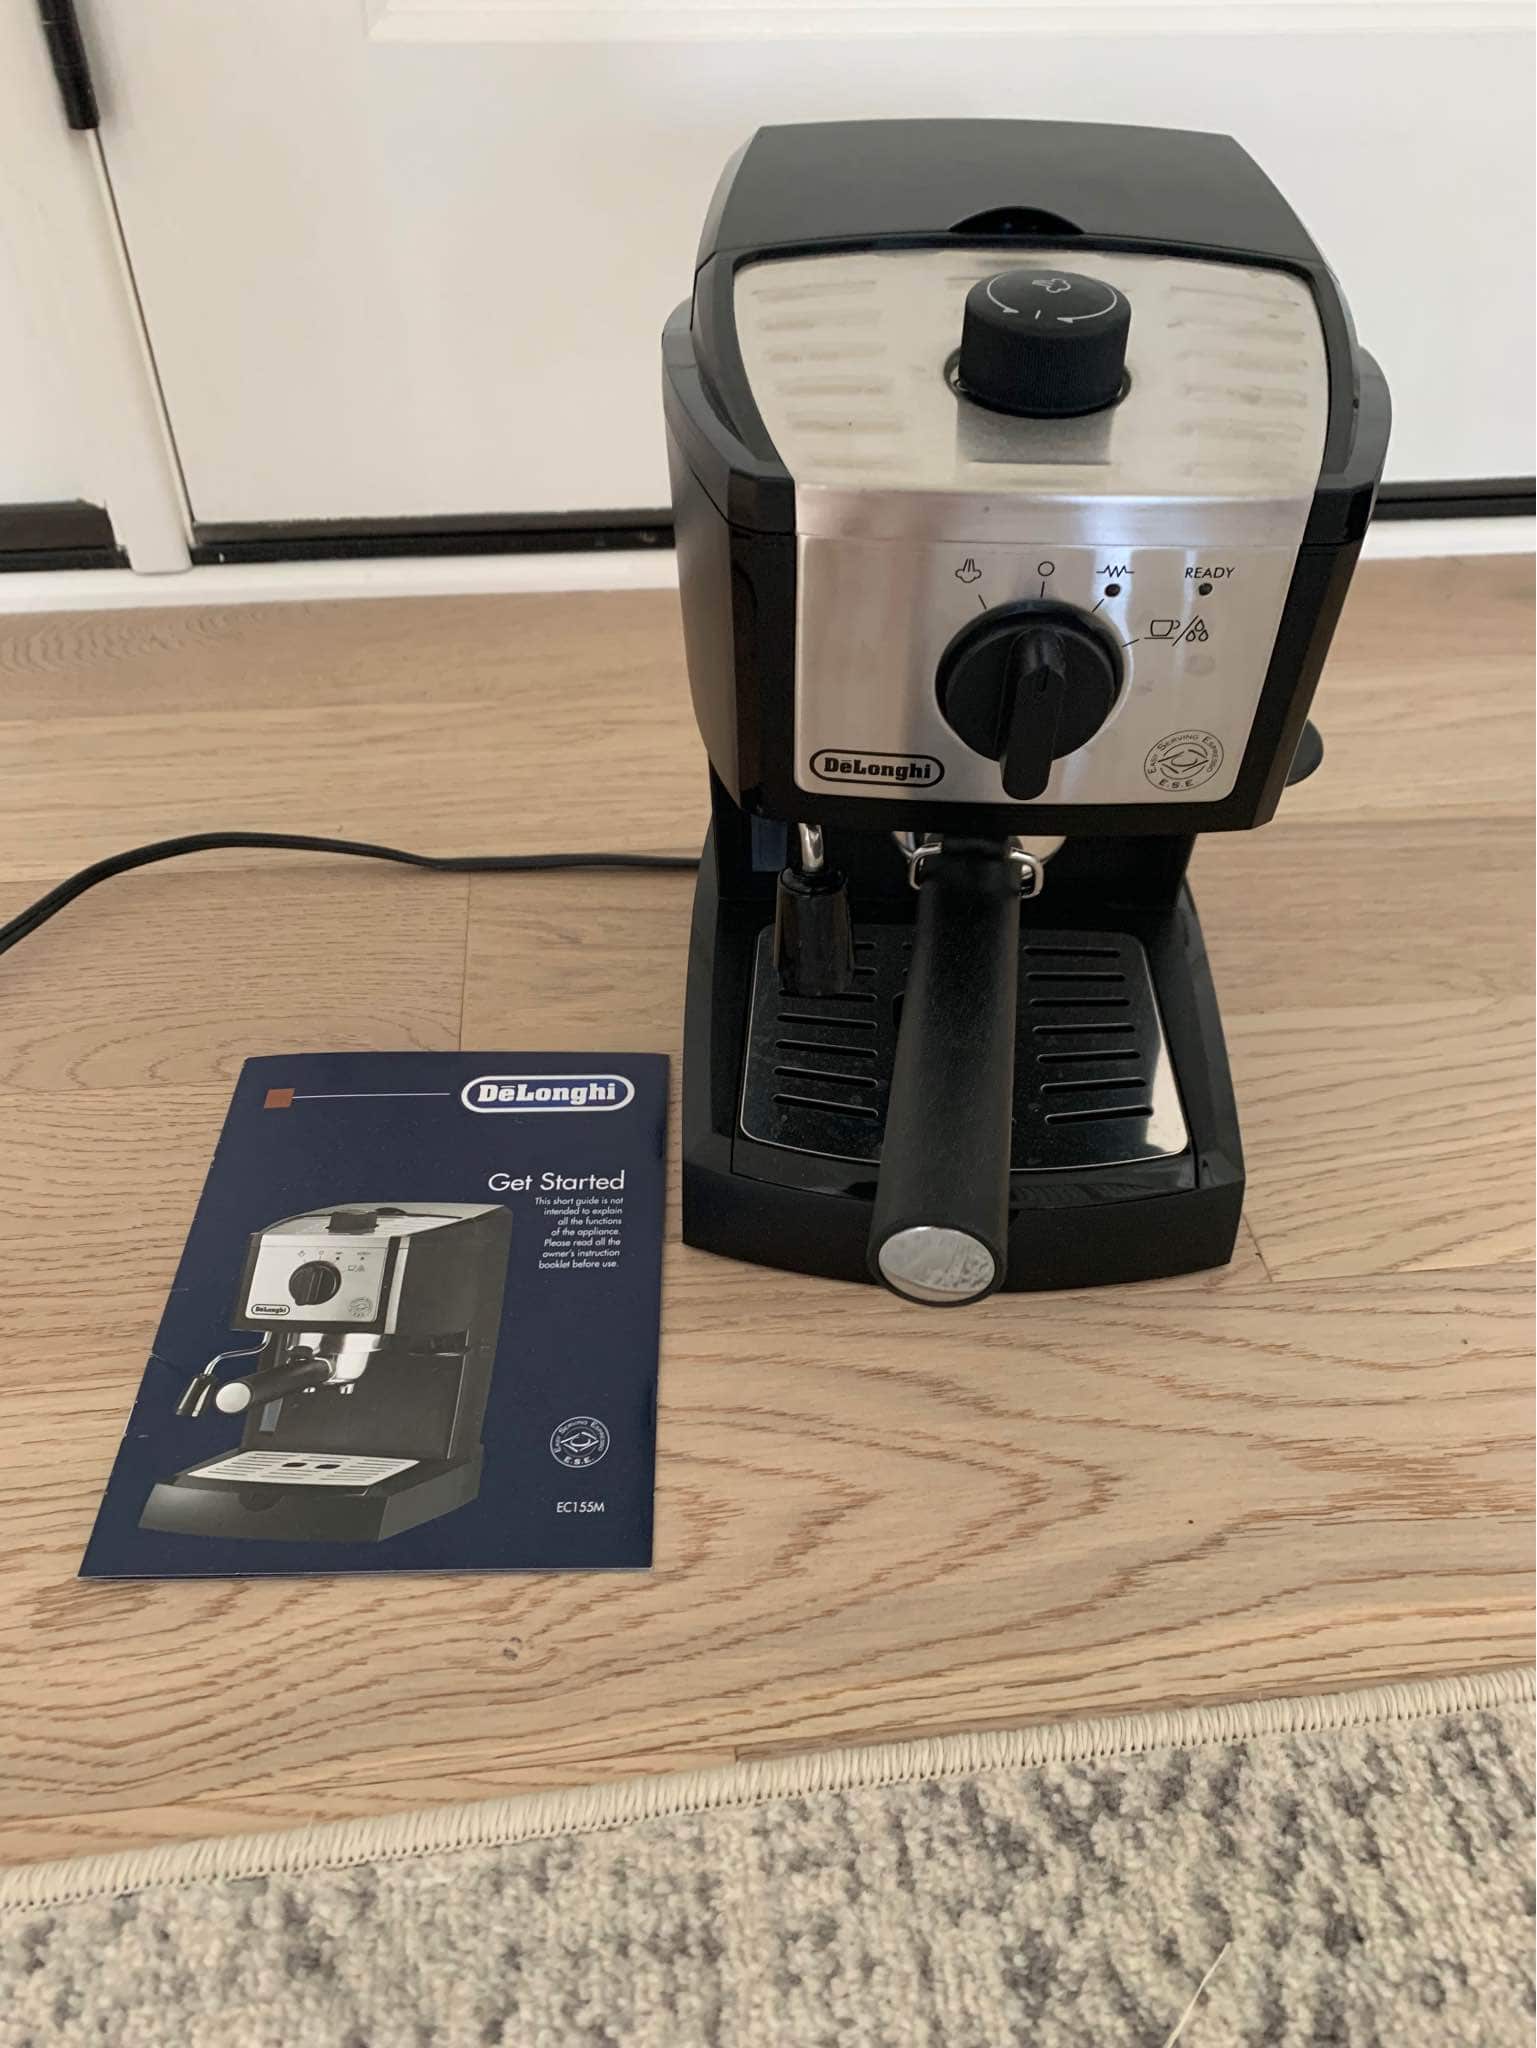 Delonghi EC155 can froth dry foam for lattes or cappuccinos